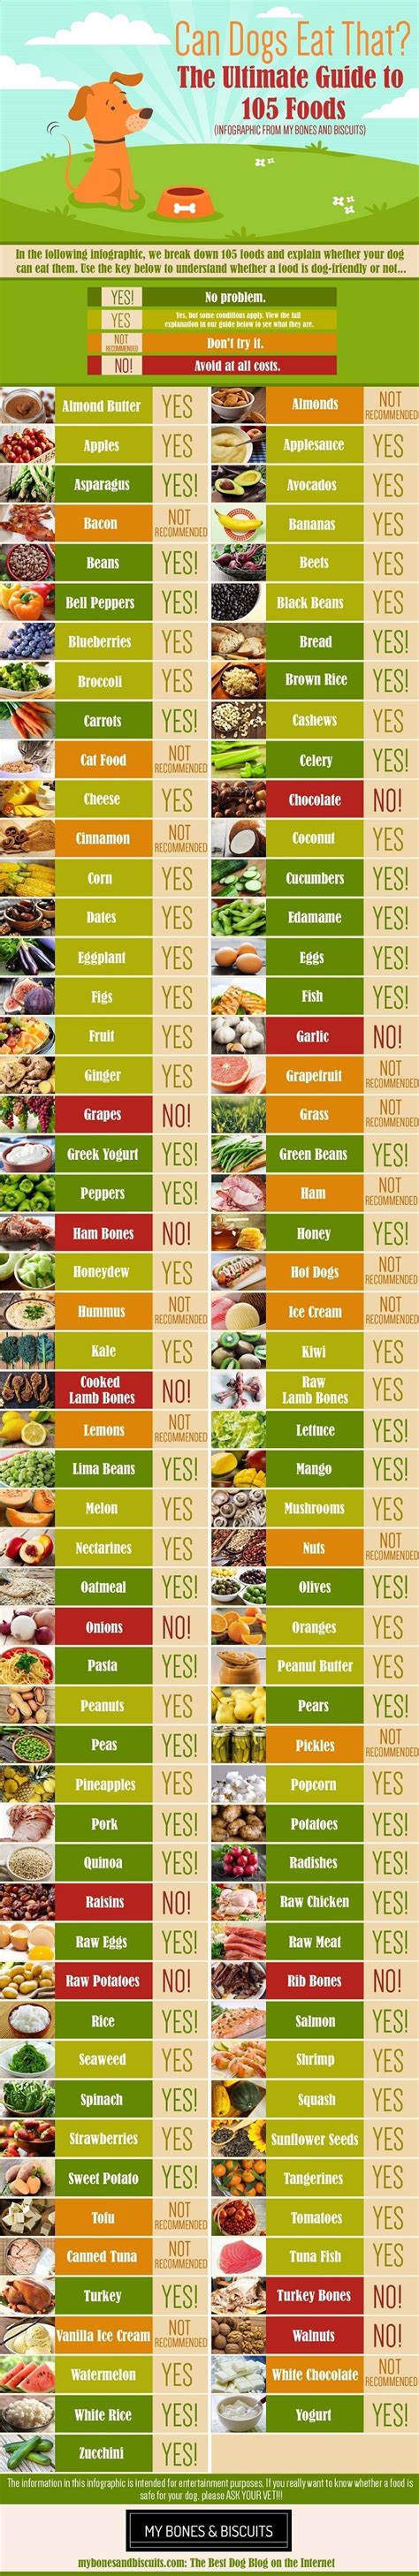 Most dog owners would say that their dogs eat anything they can get their paws on. Can Dogs Eat This? EPIC Guide to 105 Foods | Apples ...